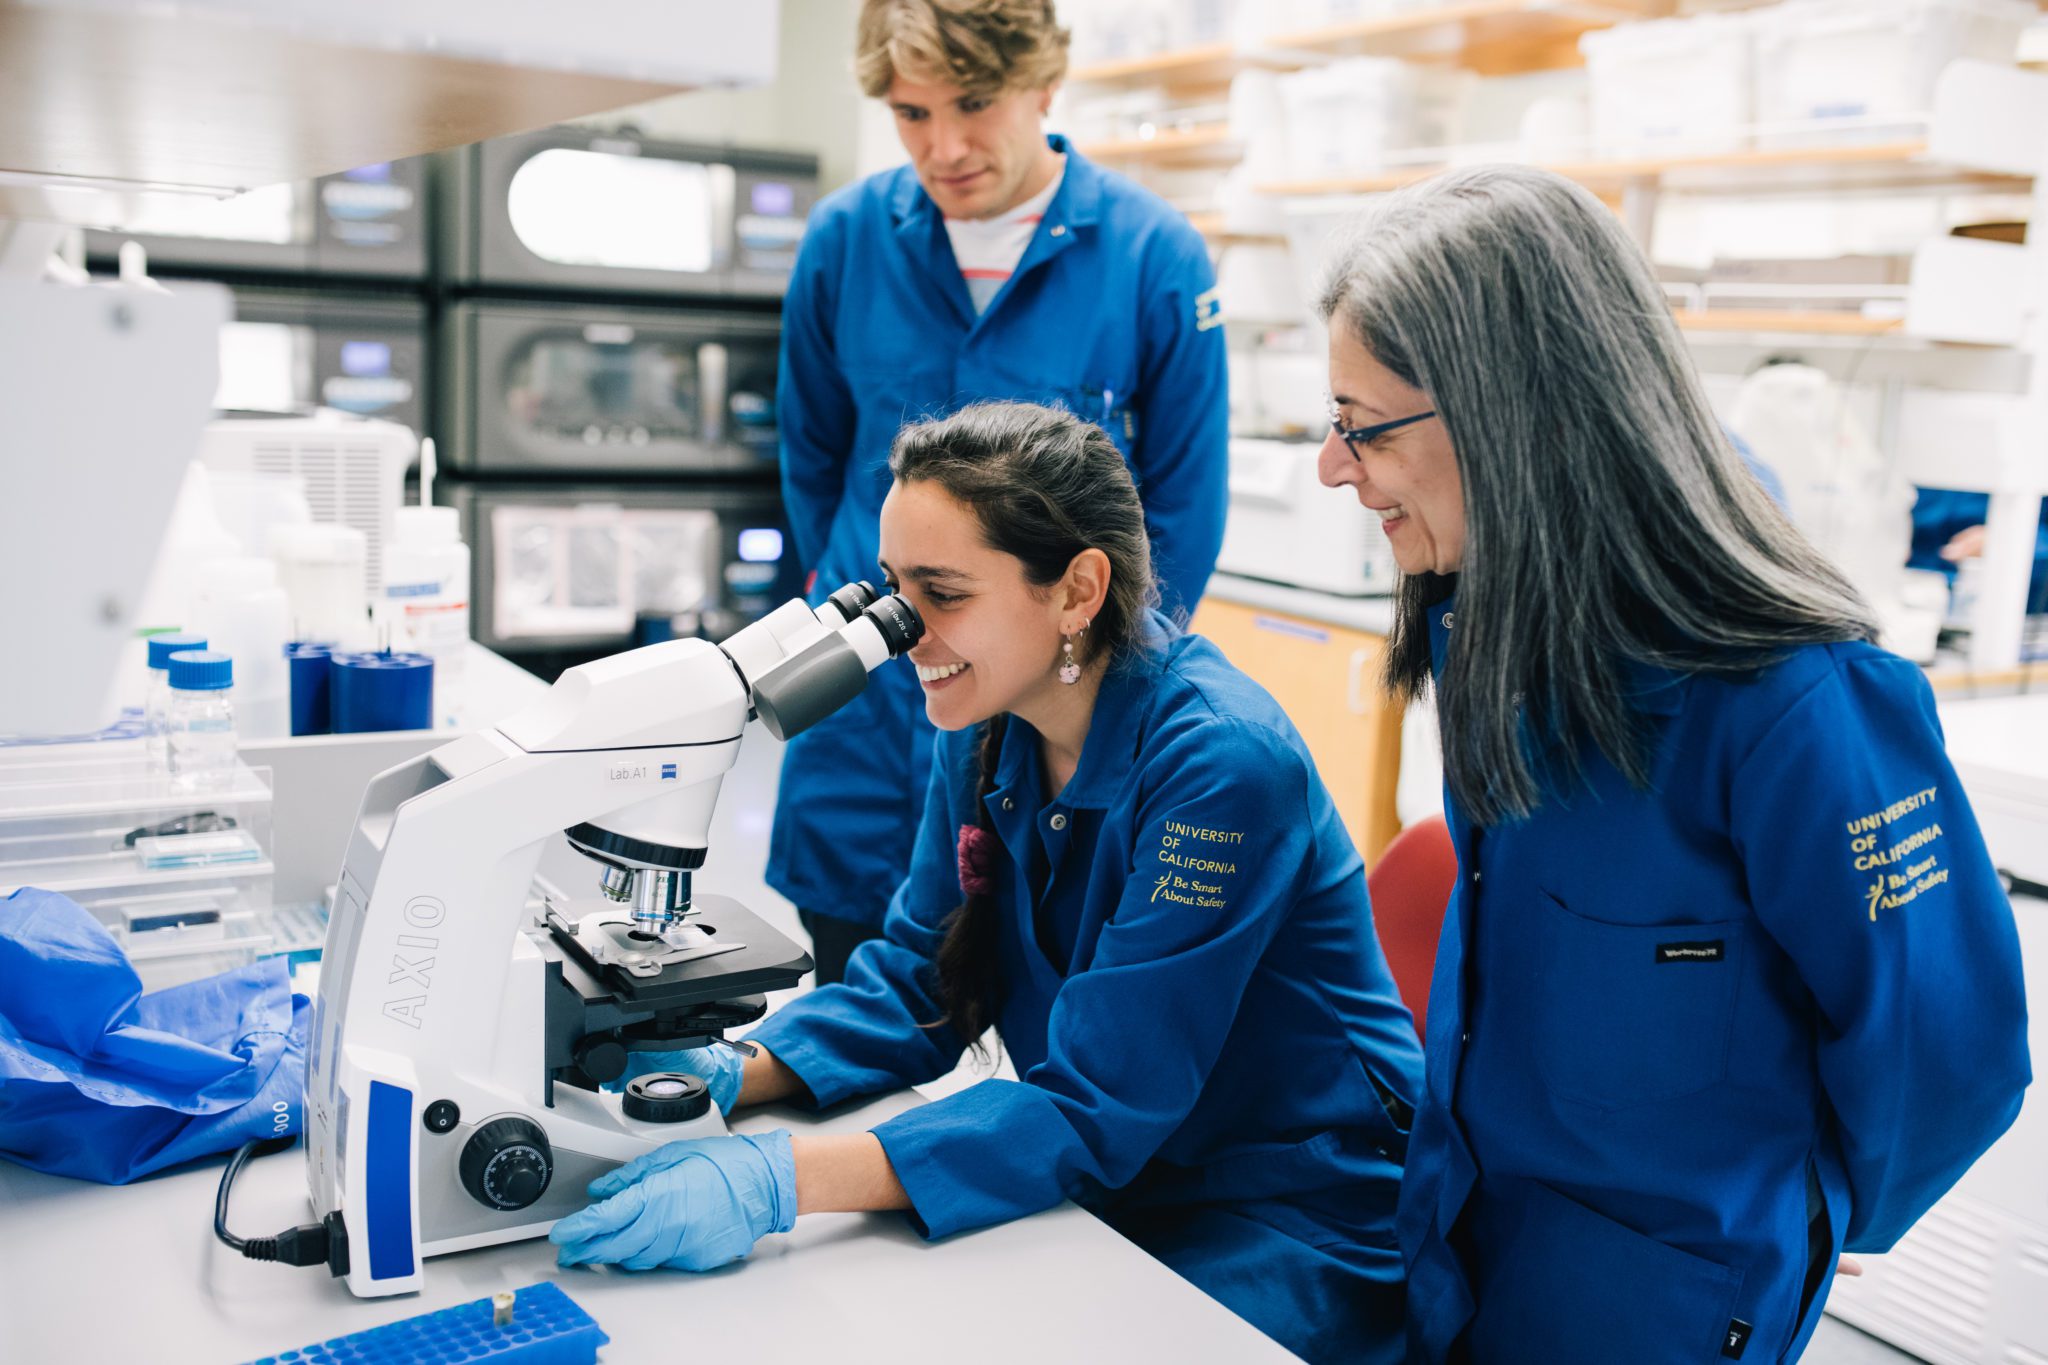 Two researchers stand in blue University of California lab coats and watch another researcher looking into a microscope.